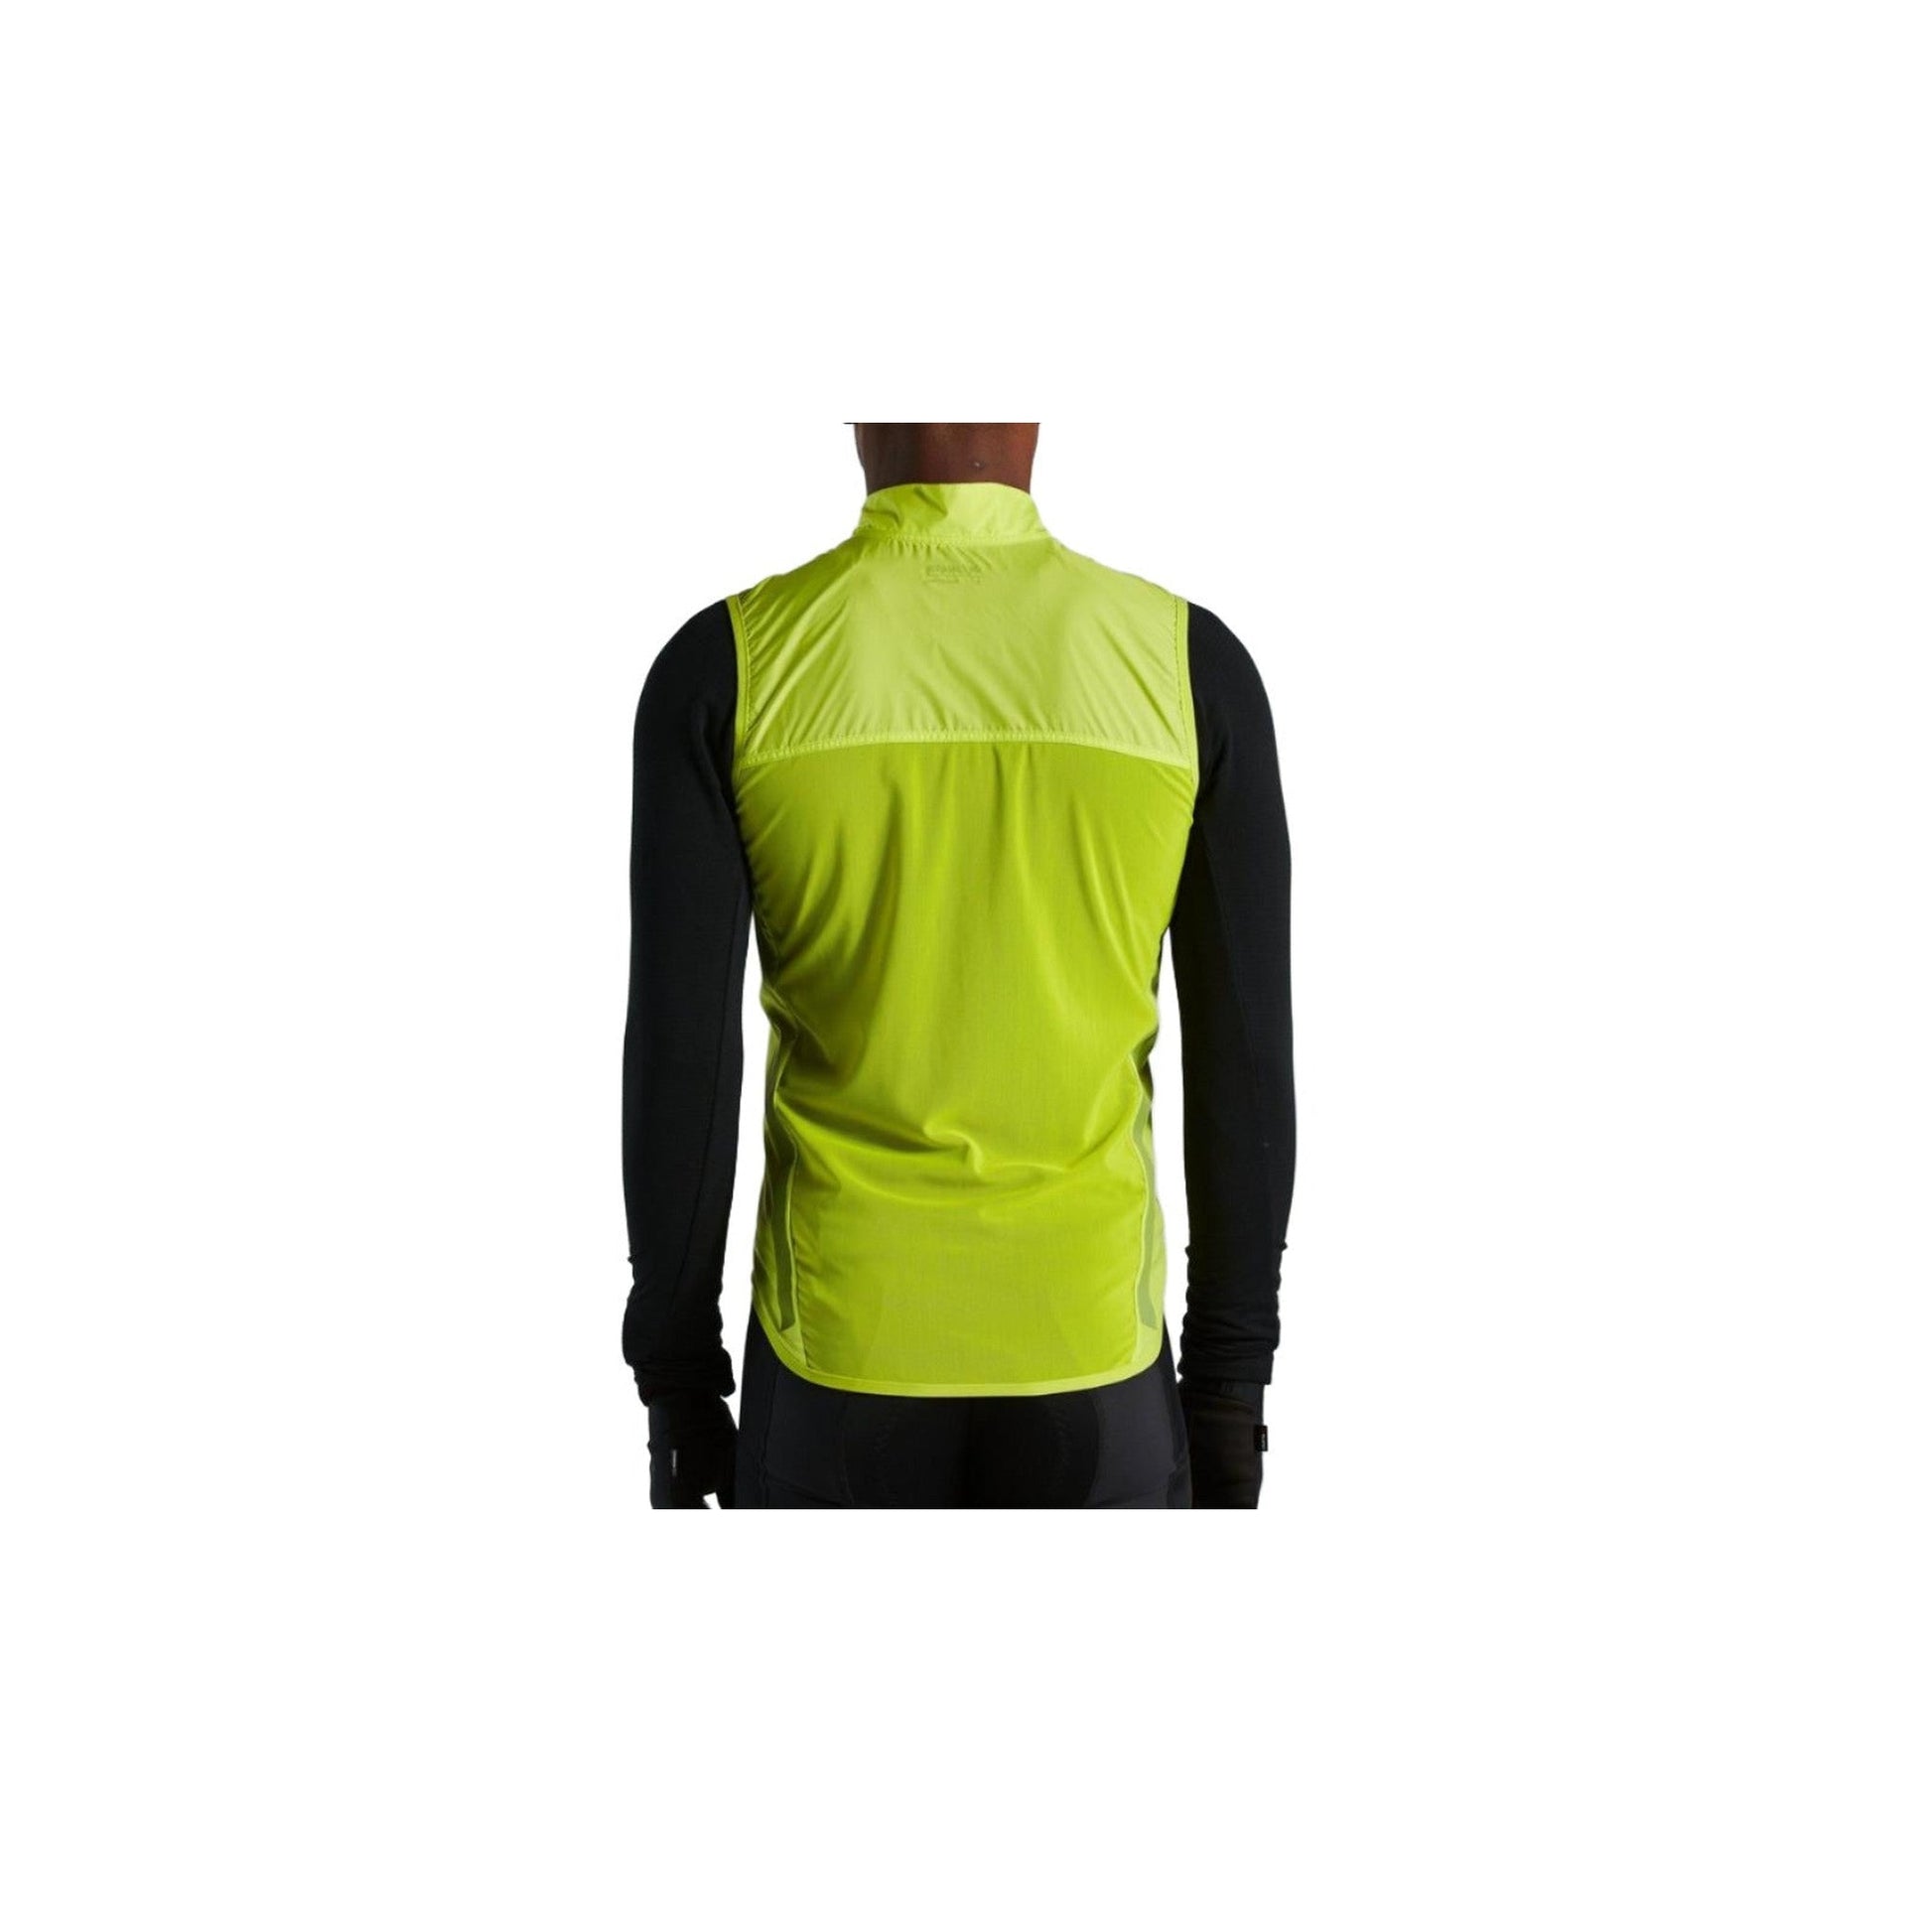 Men's HyprViz SL Pro Wind Gilet | Complete Cyclist - A gilet is arguably the most versatile piece of cycling clothing – perfect for cool mornings, fast descents, and varying temperatures.

